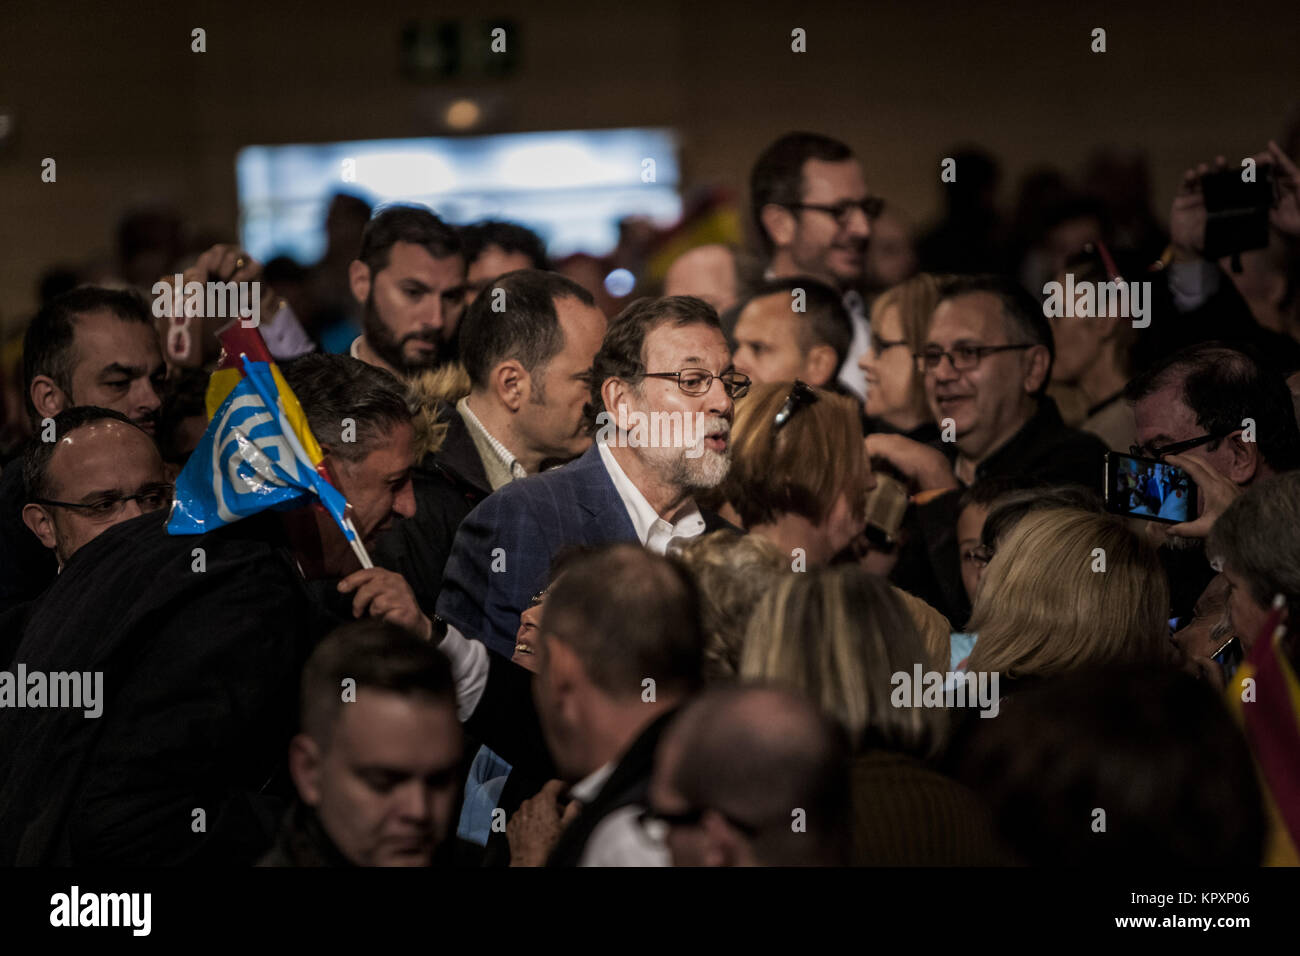 December 17, 2017 - Salou, CataluÃ±a, Spain - Mariano Rajoy, President of Spain, salutes people in Salou town during his campaign supporting the PP party candidates for the Catalunya elections. Credit: Celestino Arce/ZUMA Wire/Alamy Live News Stock Photo